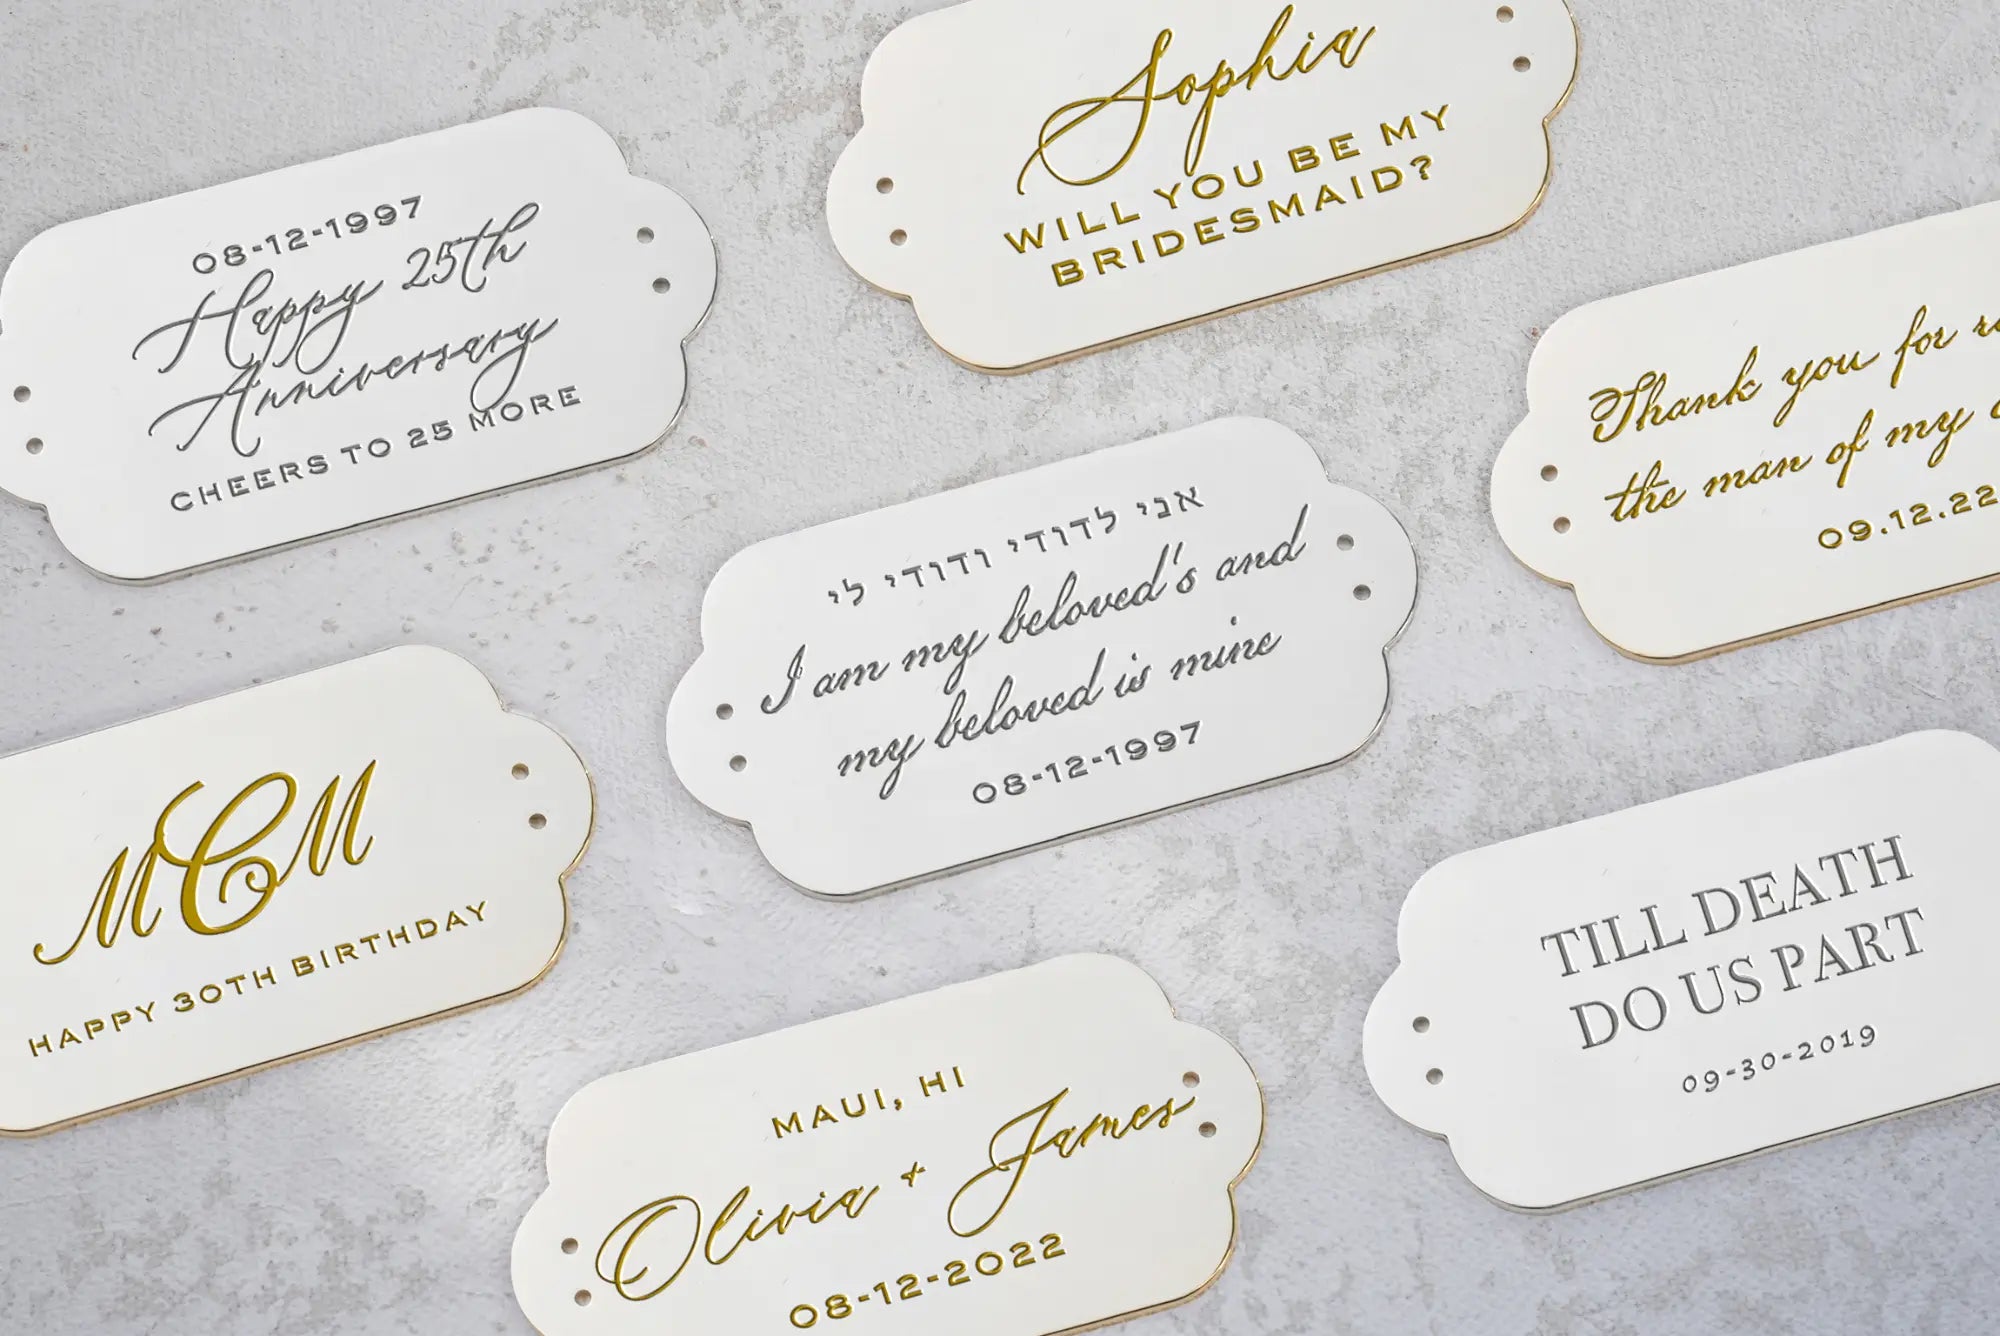 Assorted The Bella Rosa Collection personalized plaque sentiment engraving white and gold calligraphy cards for various occasions displayed on a light surface.